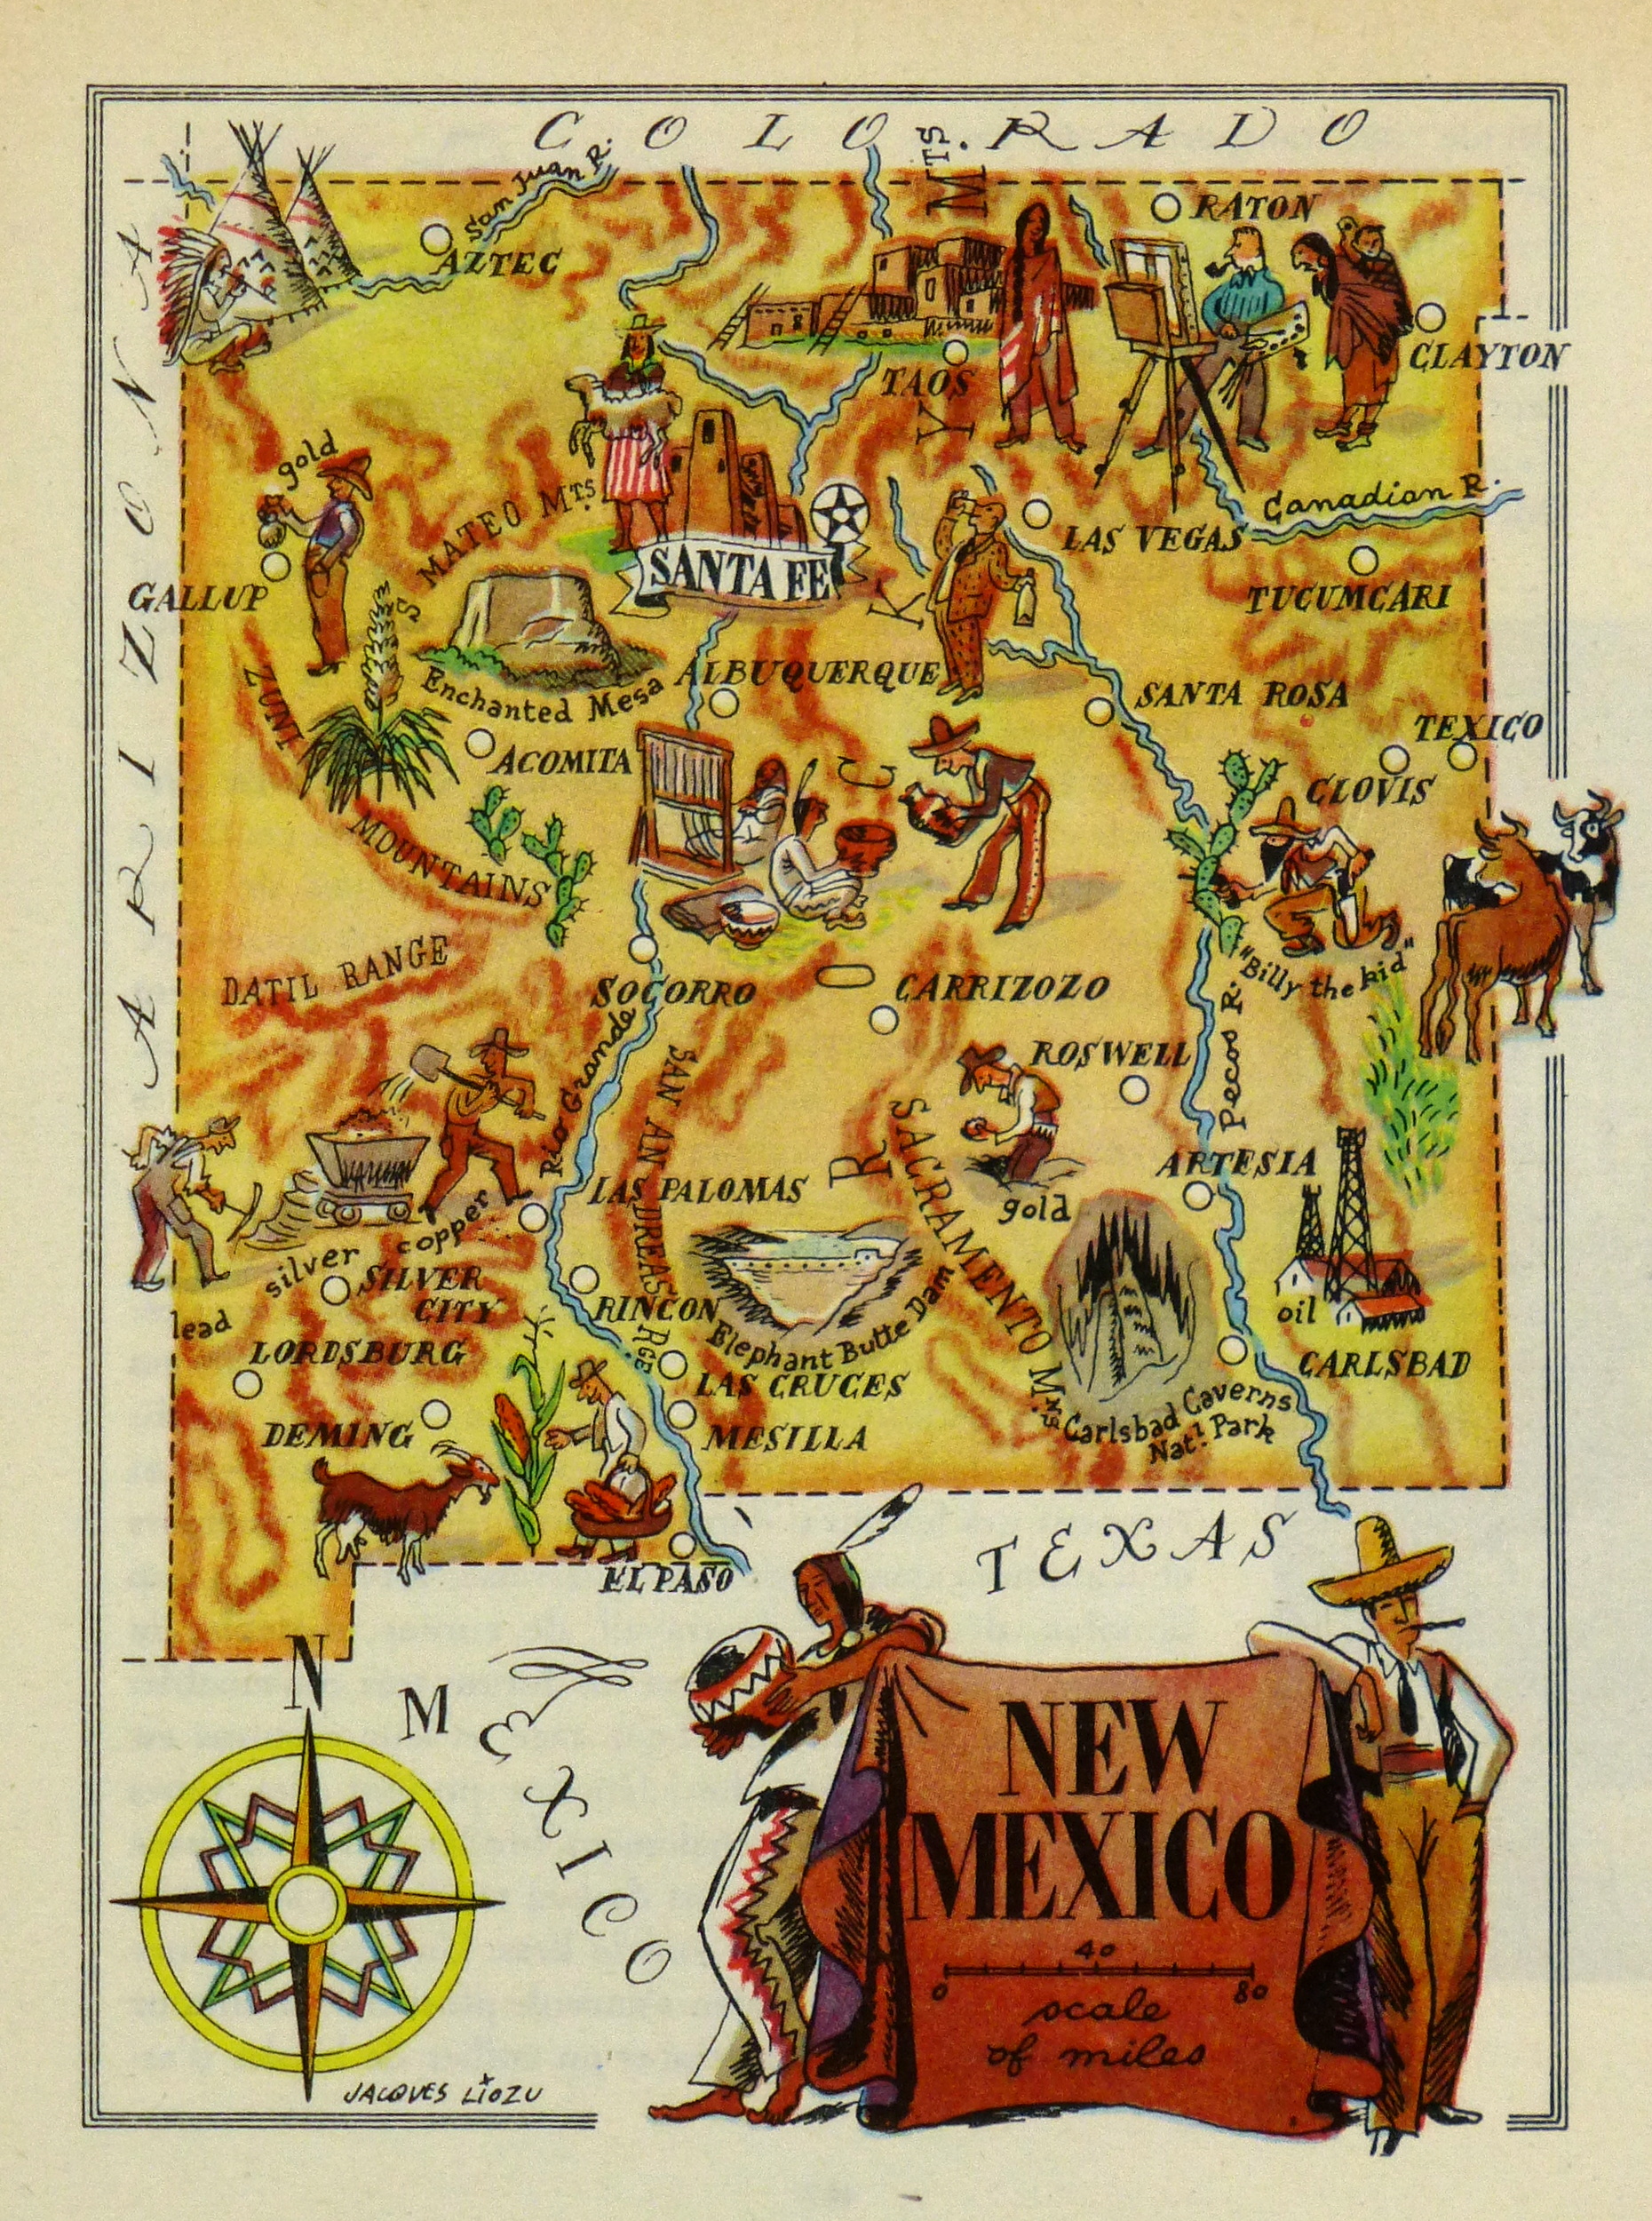 New Mexico Pictorial Map, 1946